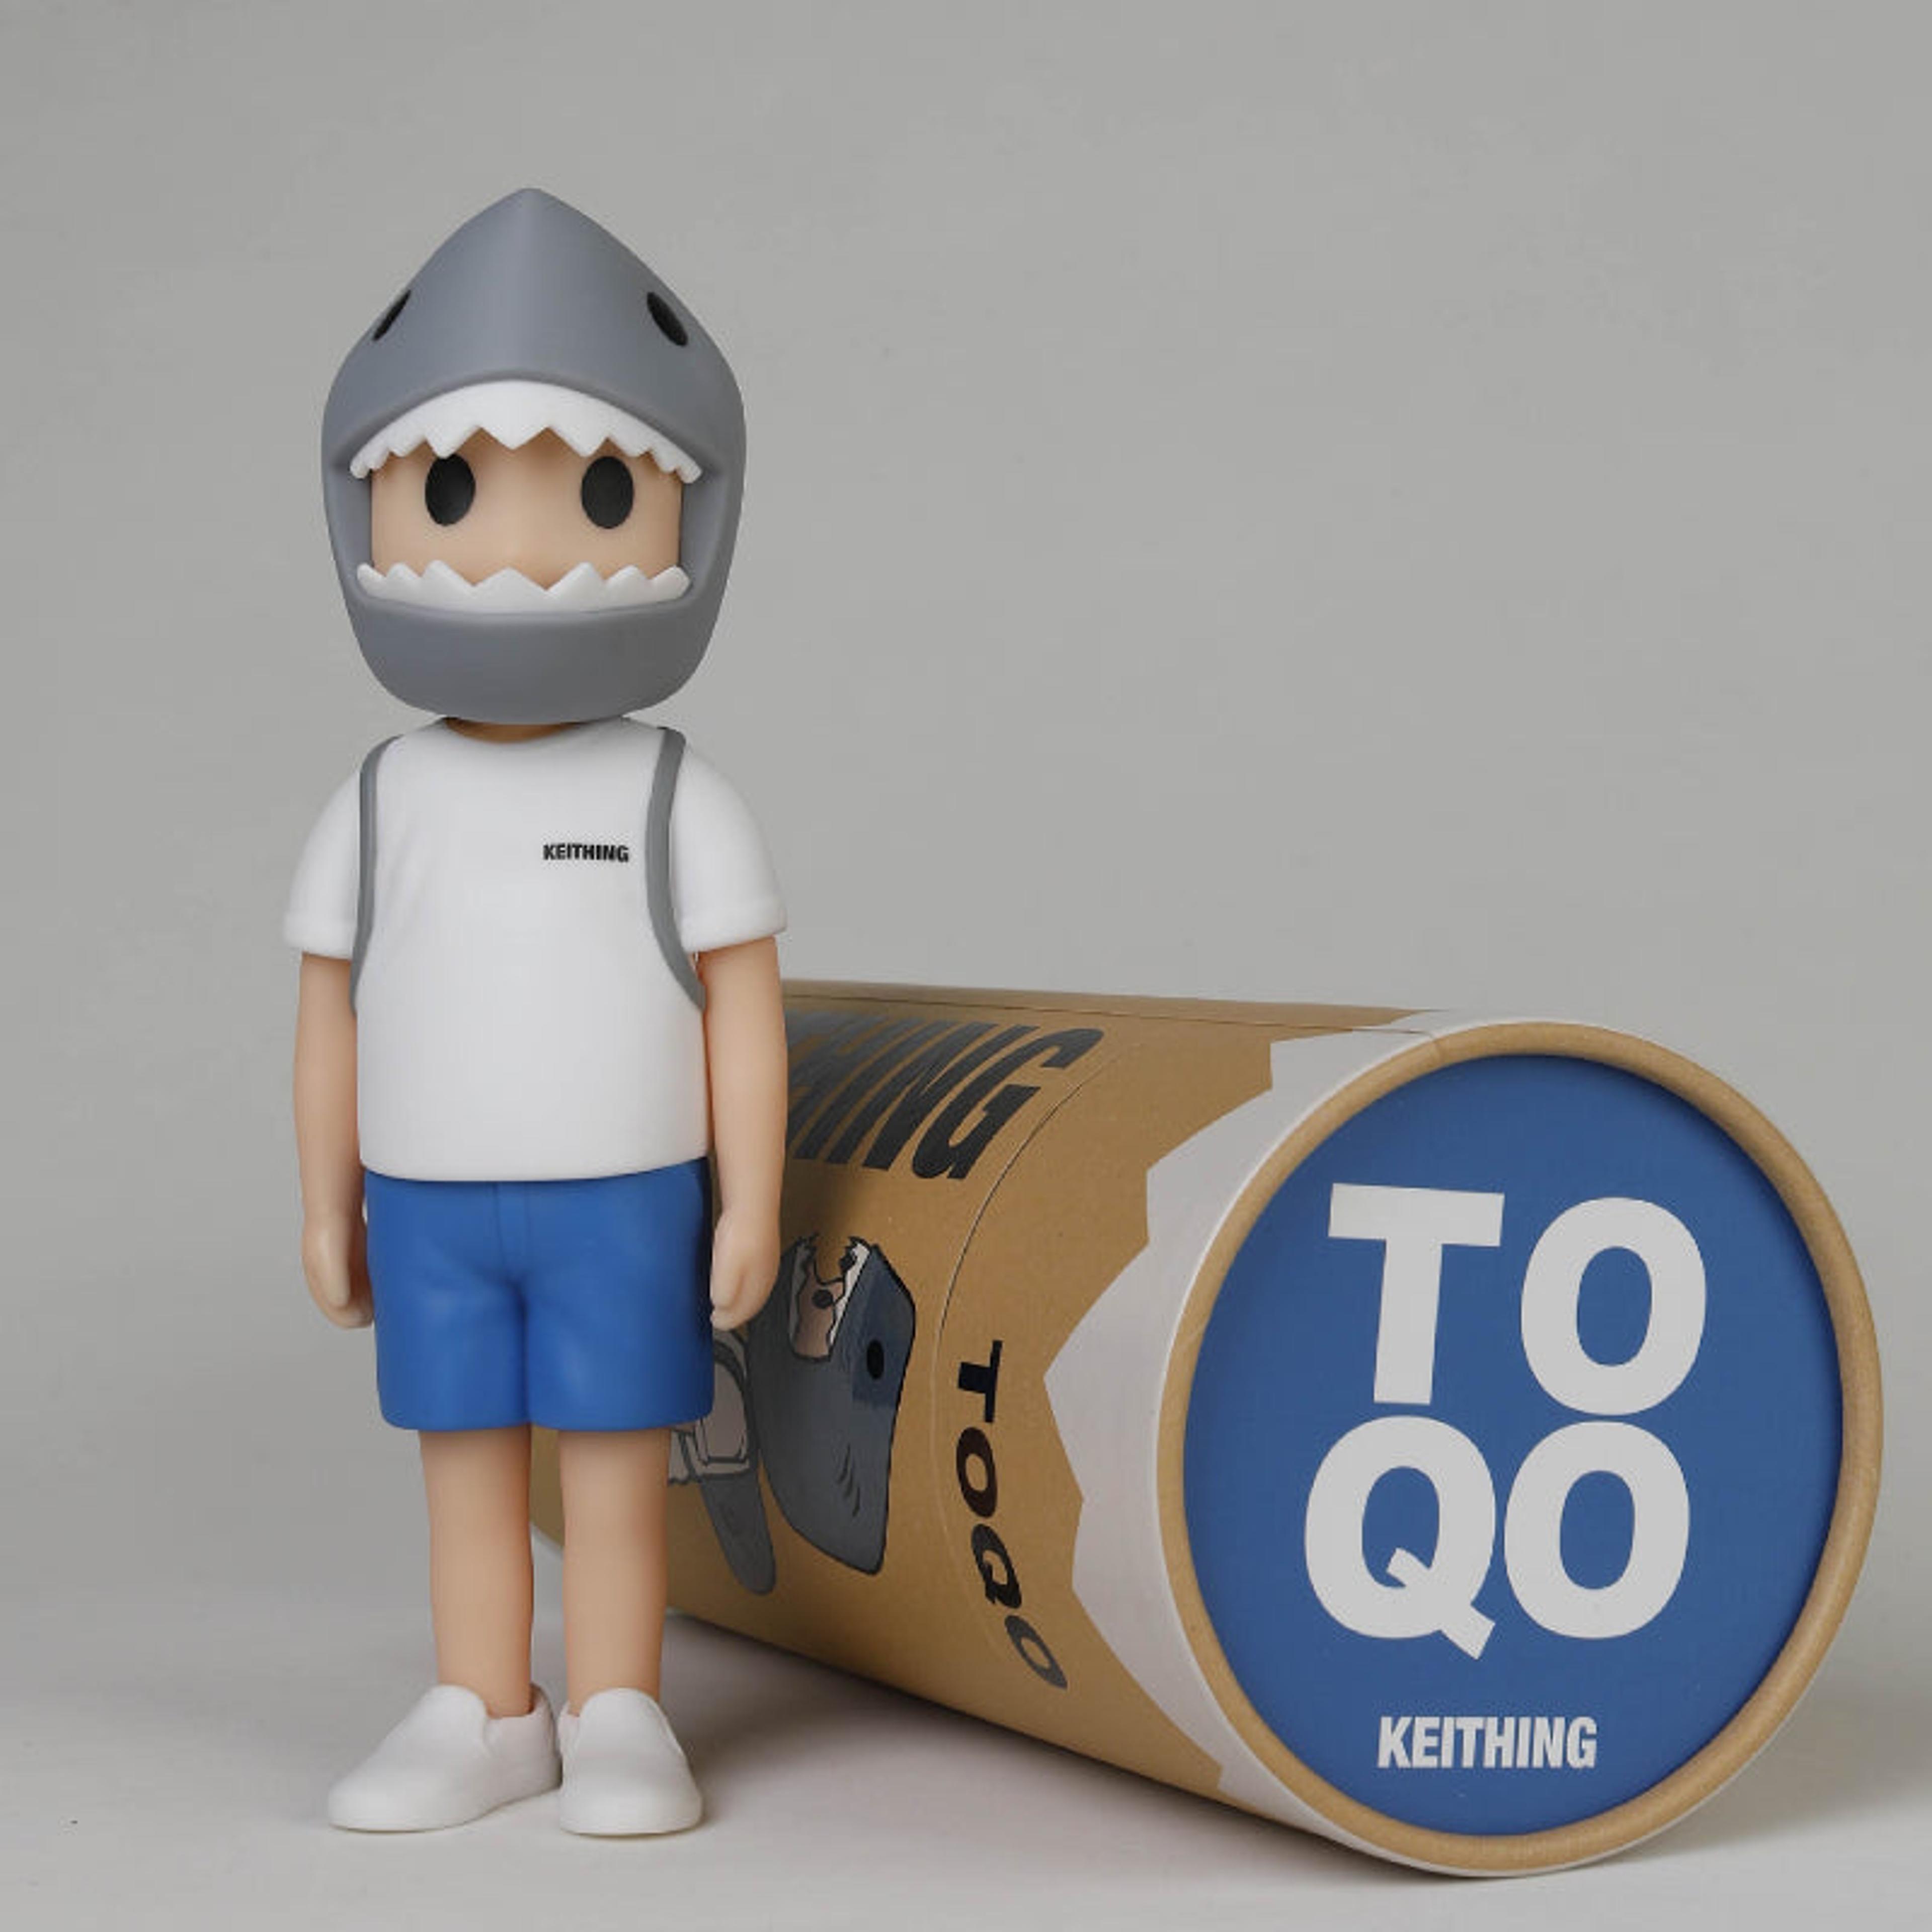 Alternate View 2 of 10" TOQO by KEITHING - White OG Edition